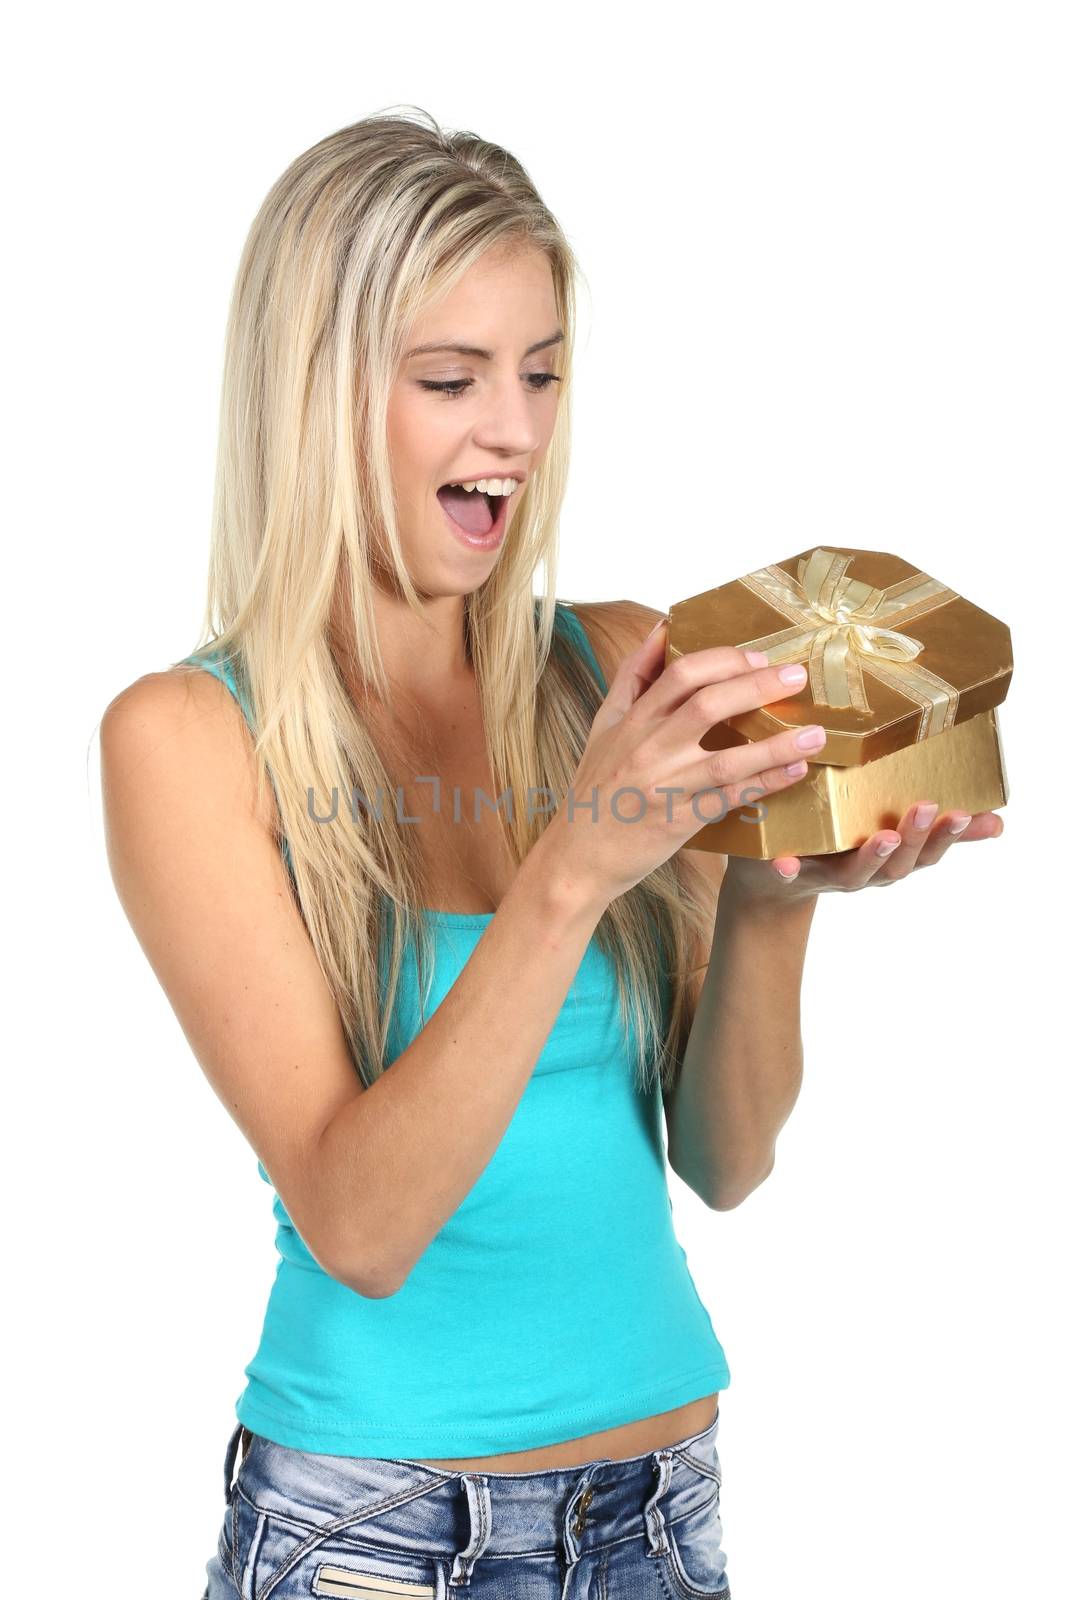 Lovely young blond lady with excited look opening a present